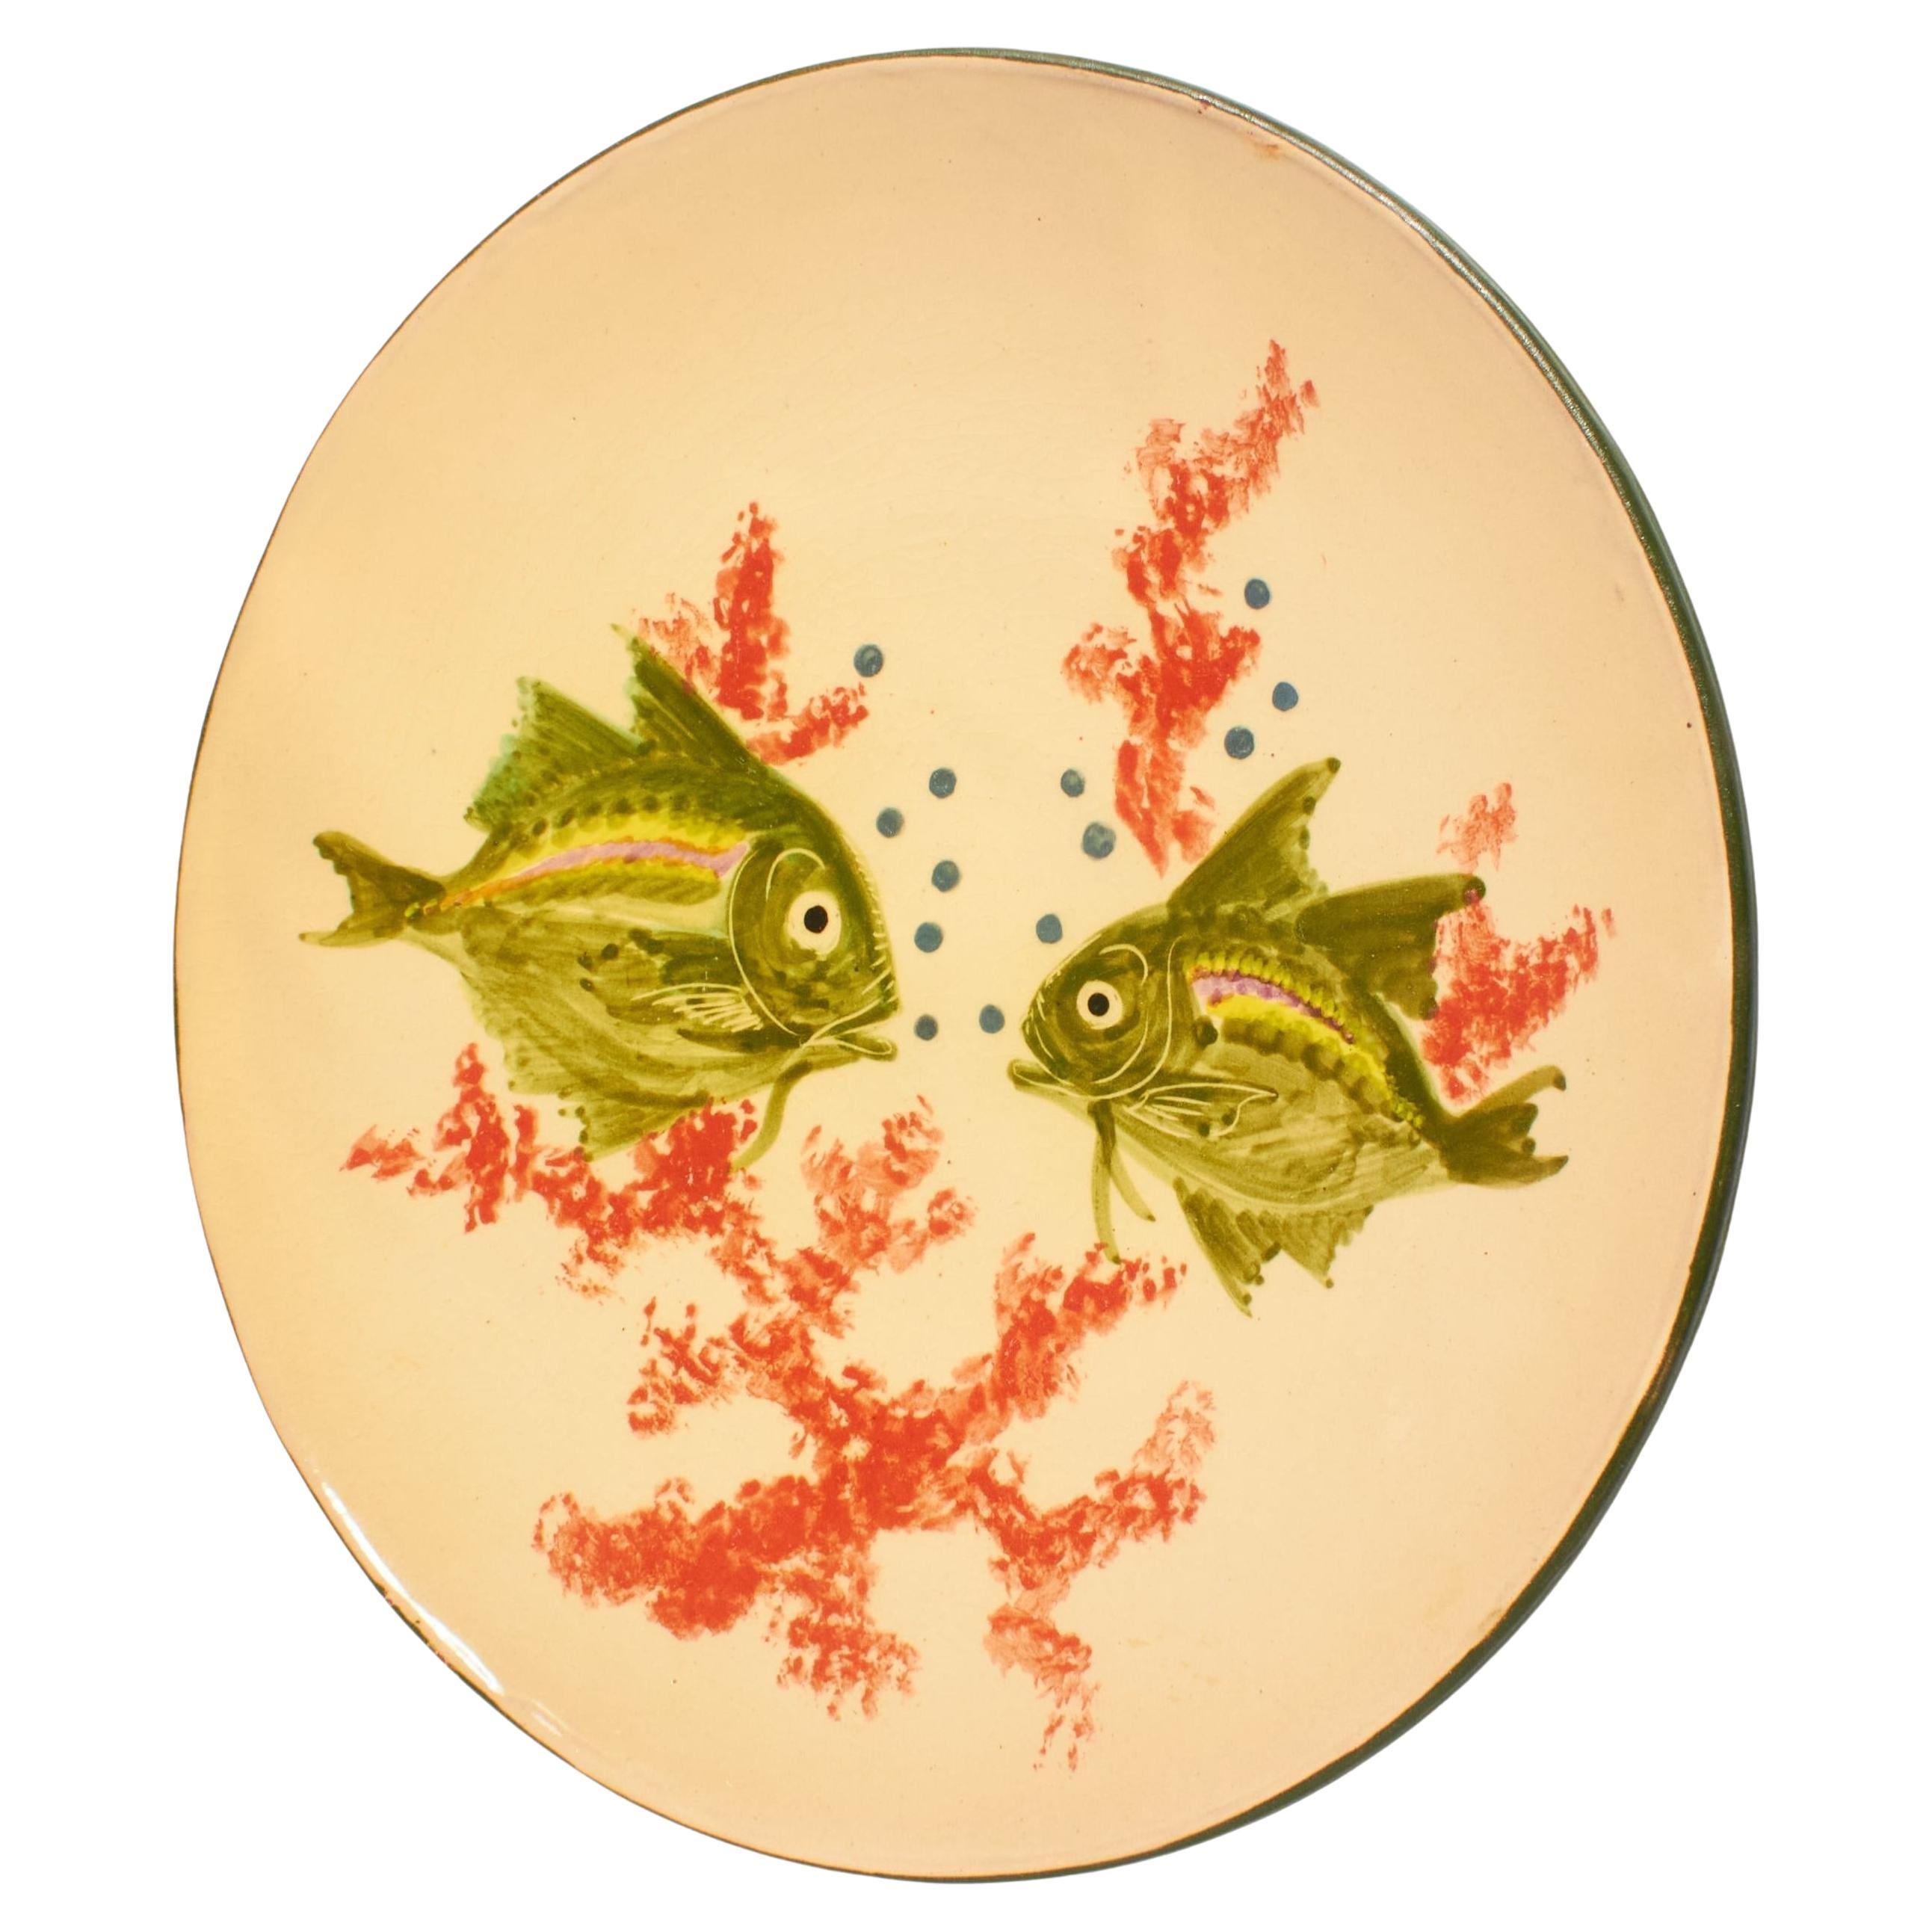 Ceramic Traditional Hand Painted Plate by Catalan Artist Diaz Costa, circa 1960